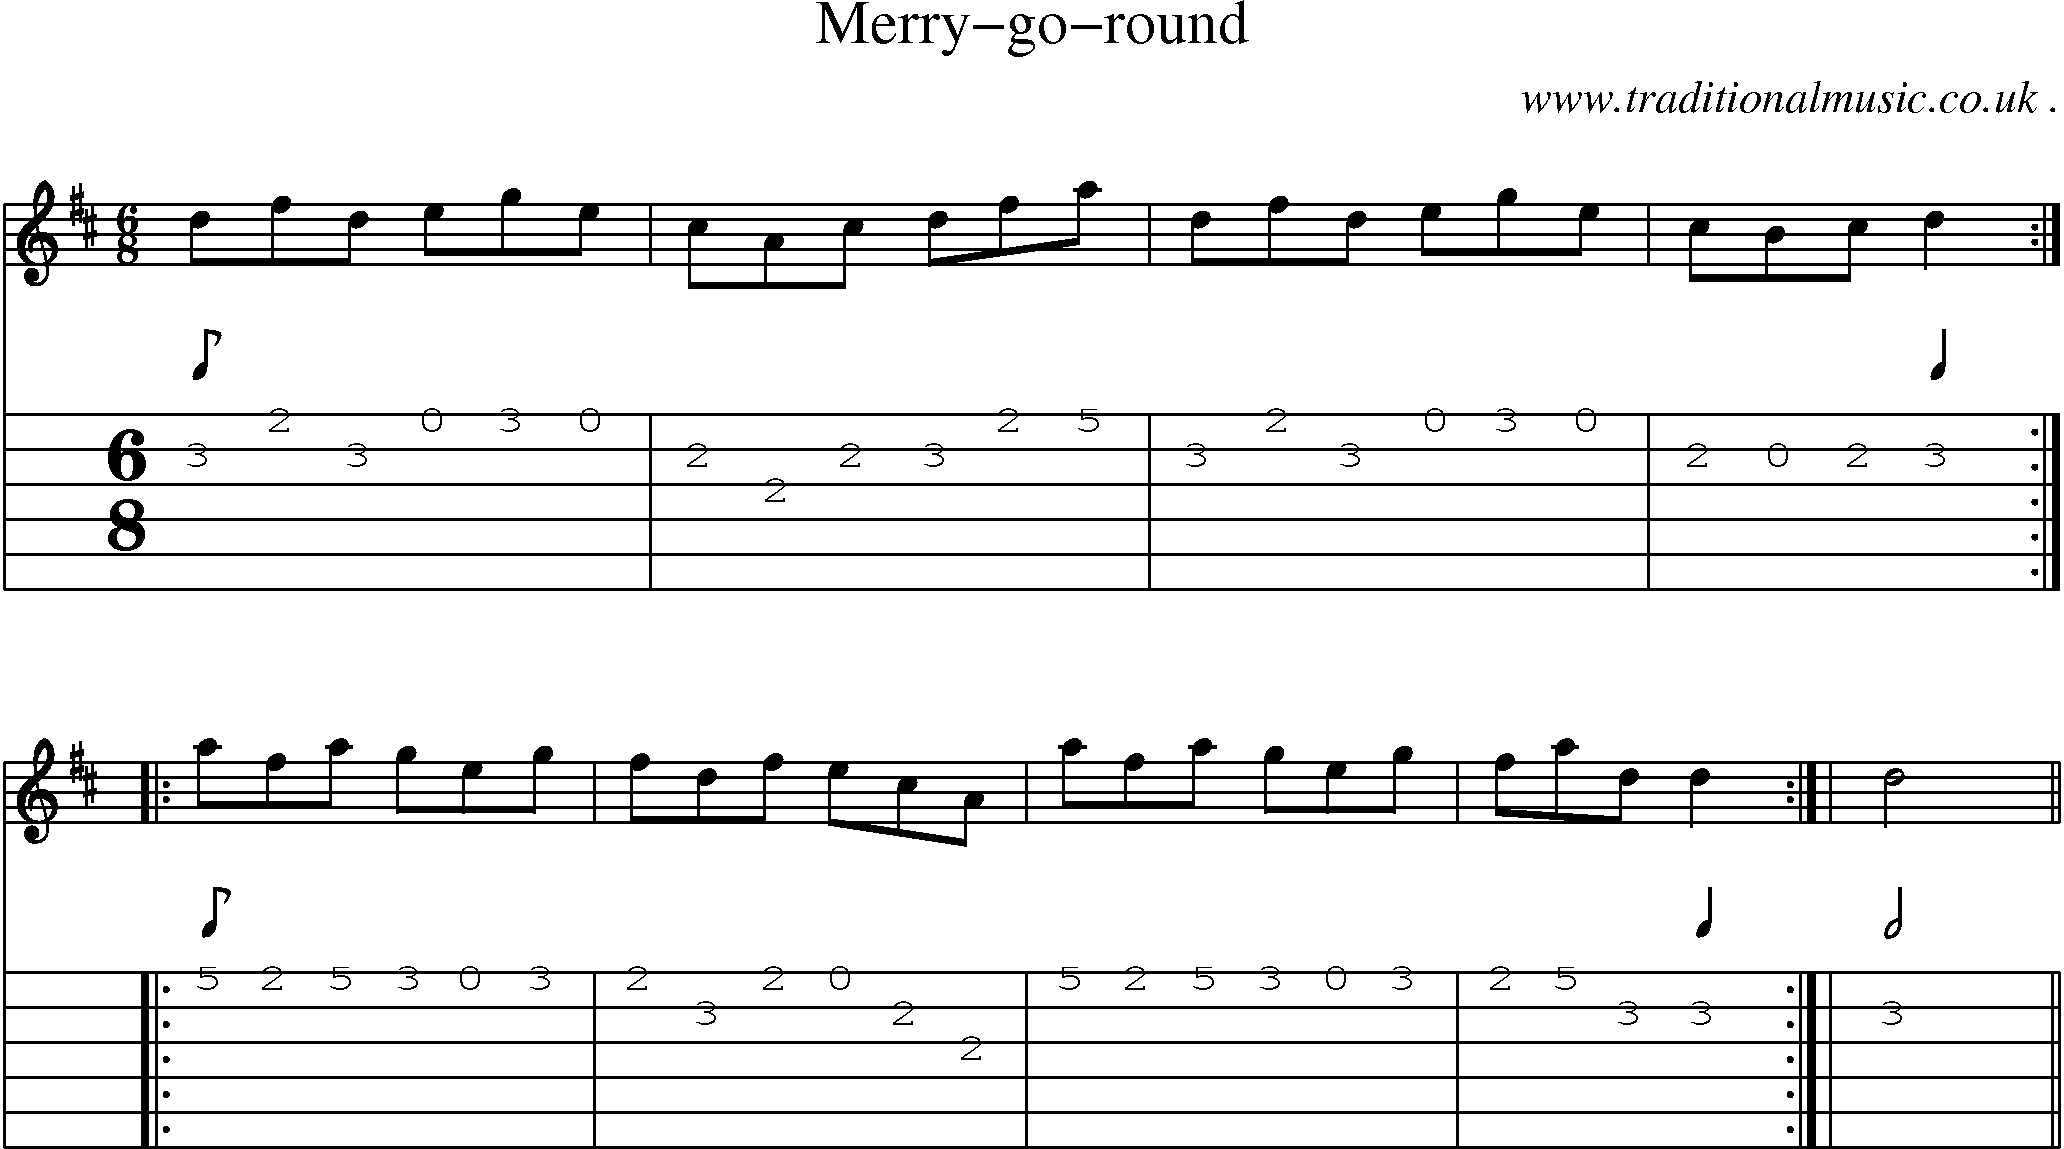 Sheet-Music and Guitar Tabs for Merry-go-round